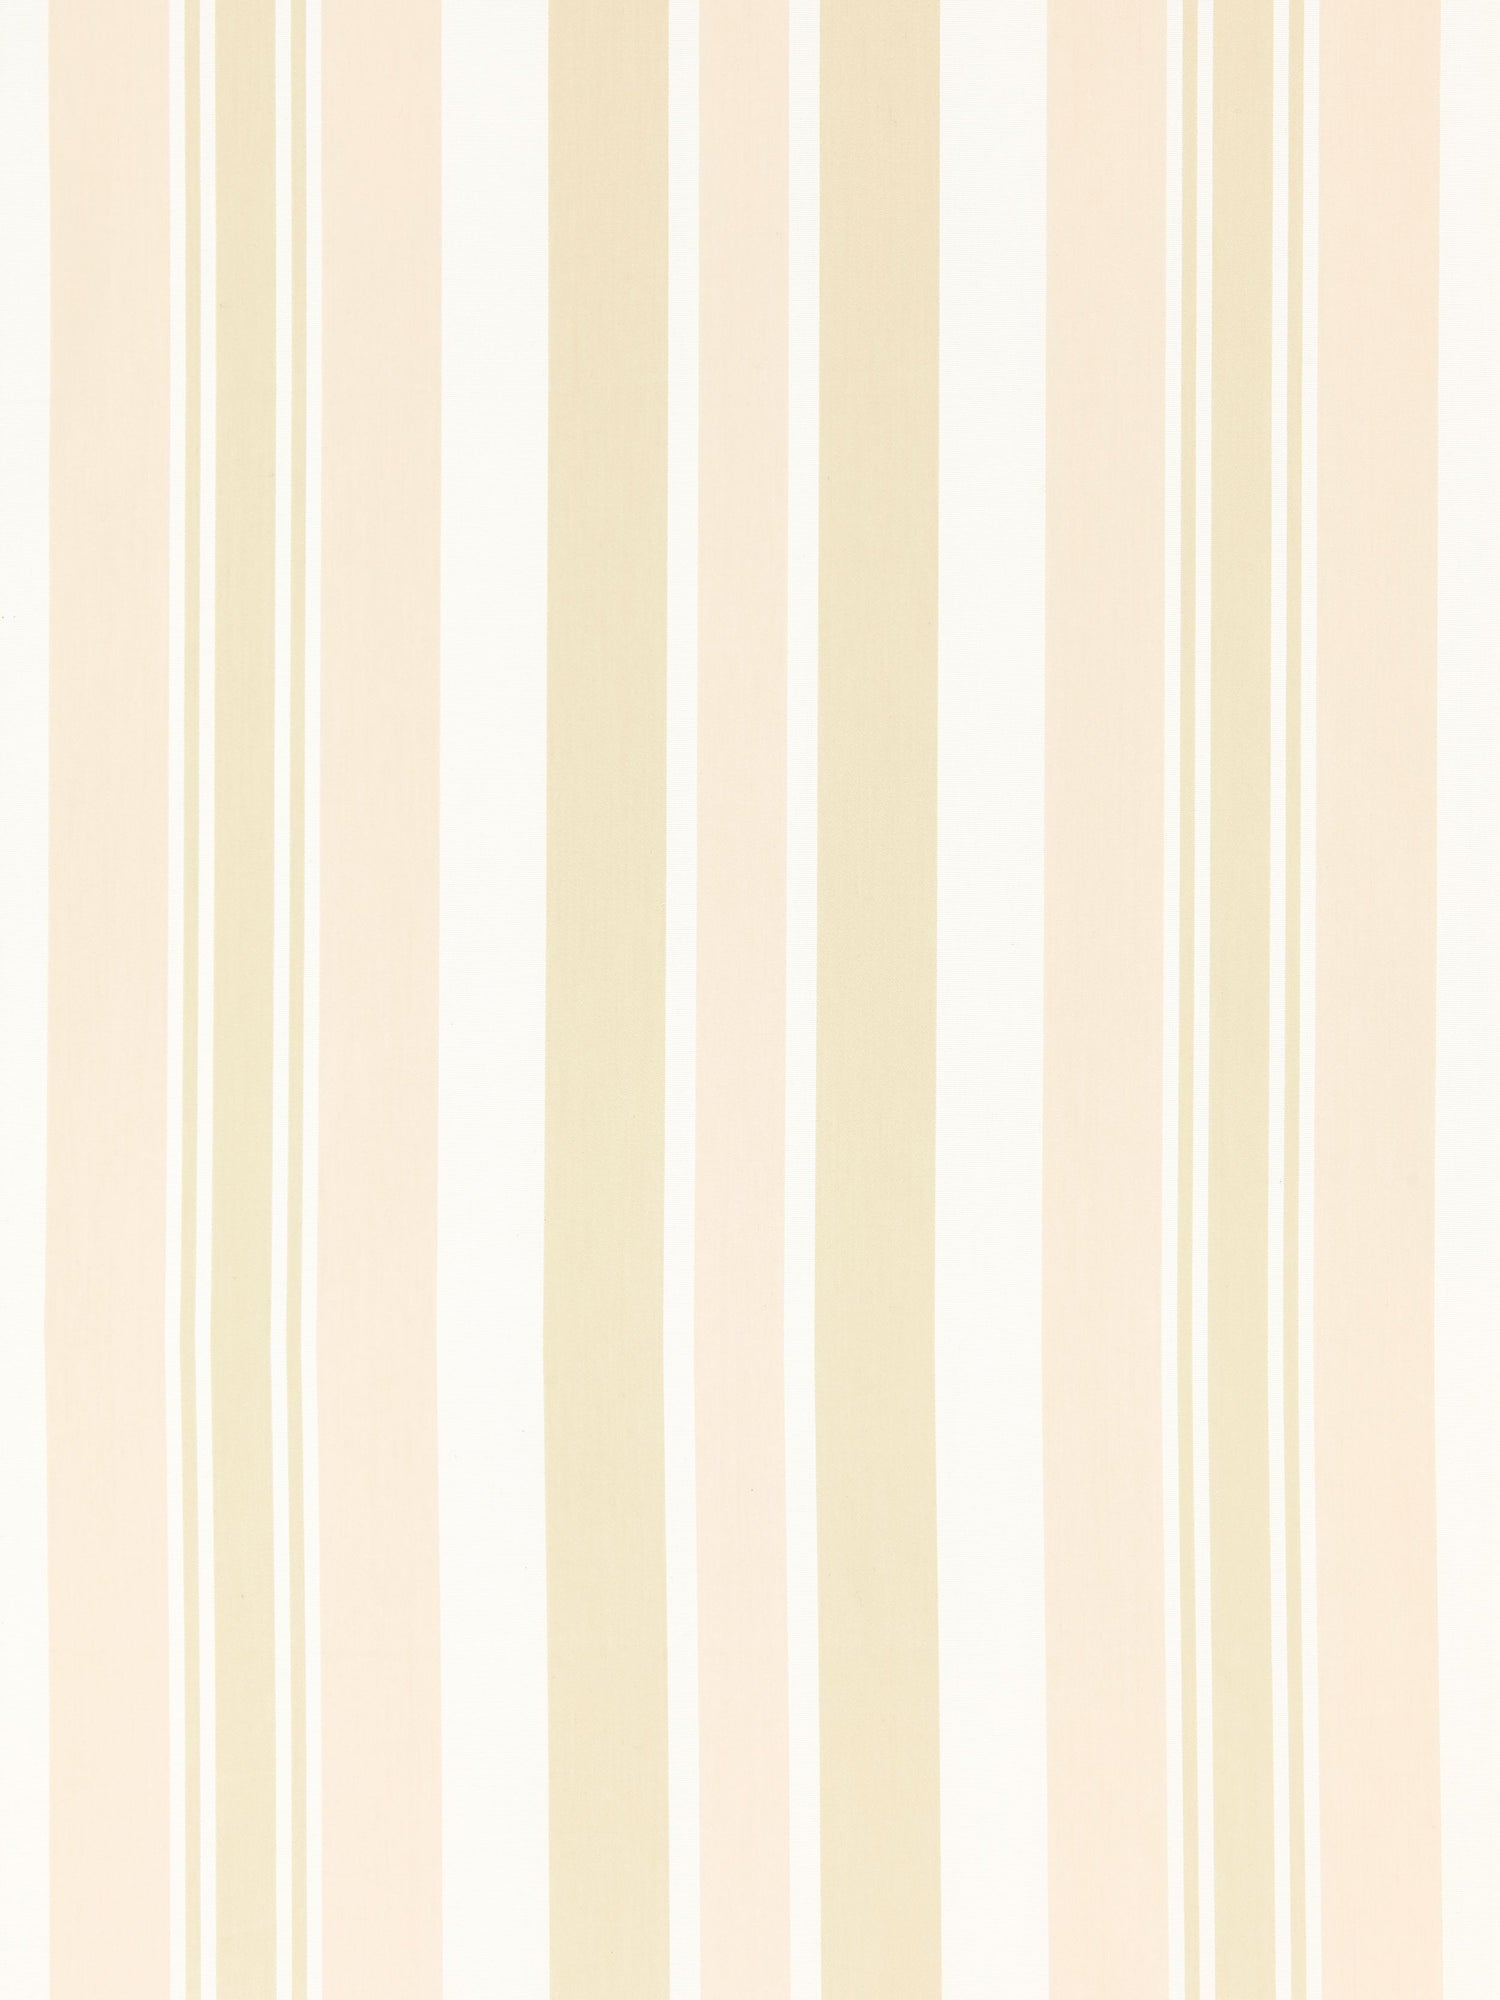 Mayfair Cotton Stripe fabric in pink sand color - pattern number SC 000127112 - by Scalamandre in the Scalamandre Fabrics Book 1 collection